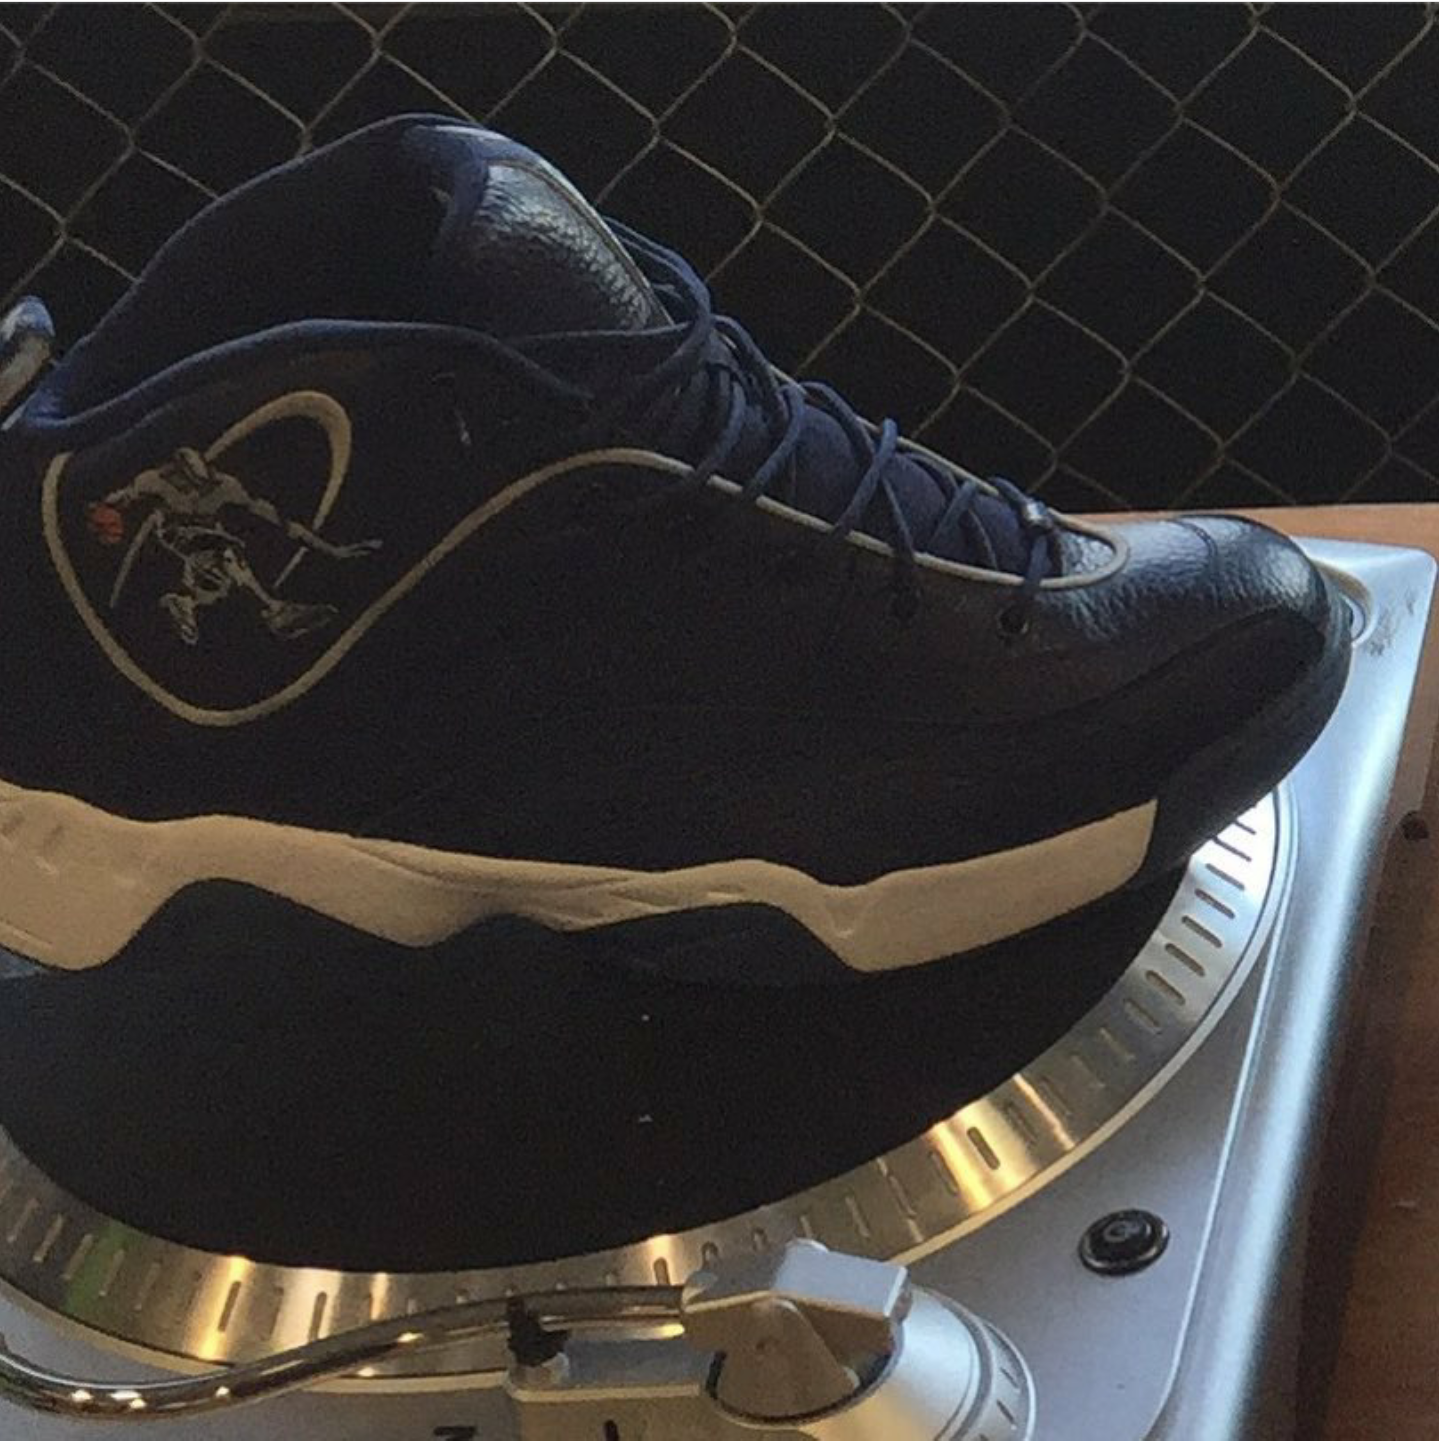 And1 is Back with the Marbury 1 Retro 